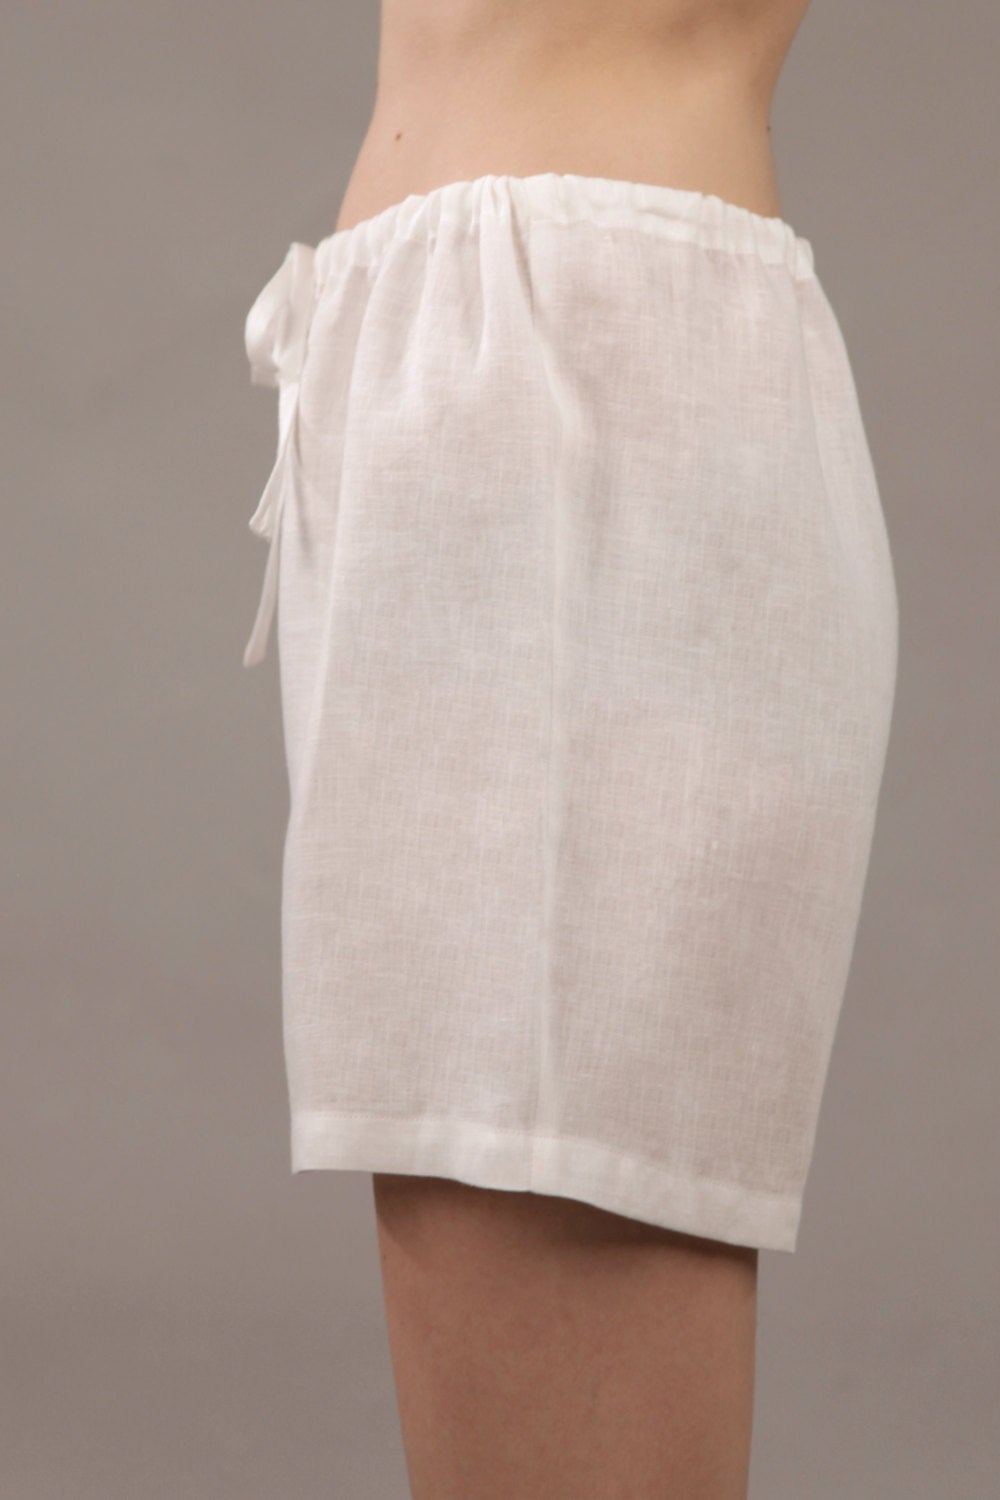 Linen Sleep Shorts CONSTANCE with Draw-stringed Waist